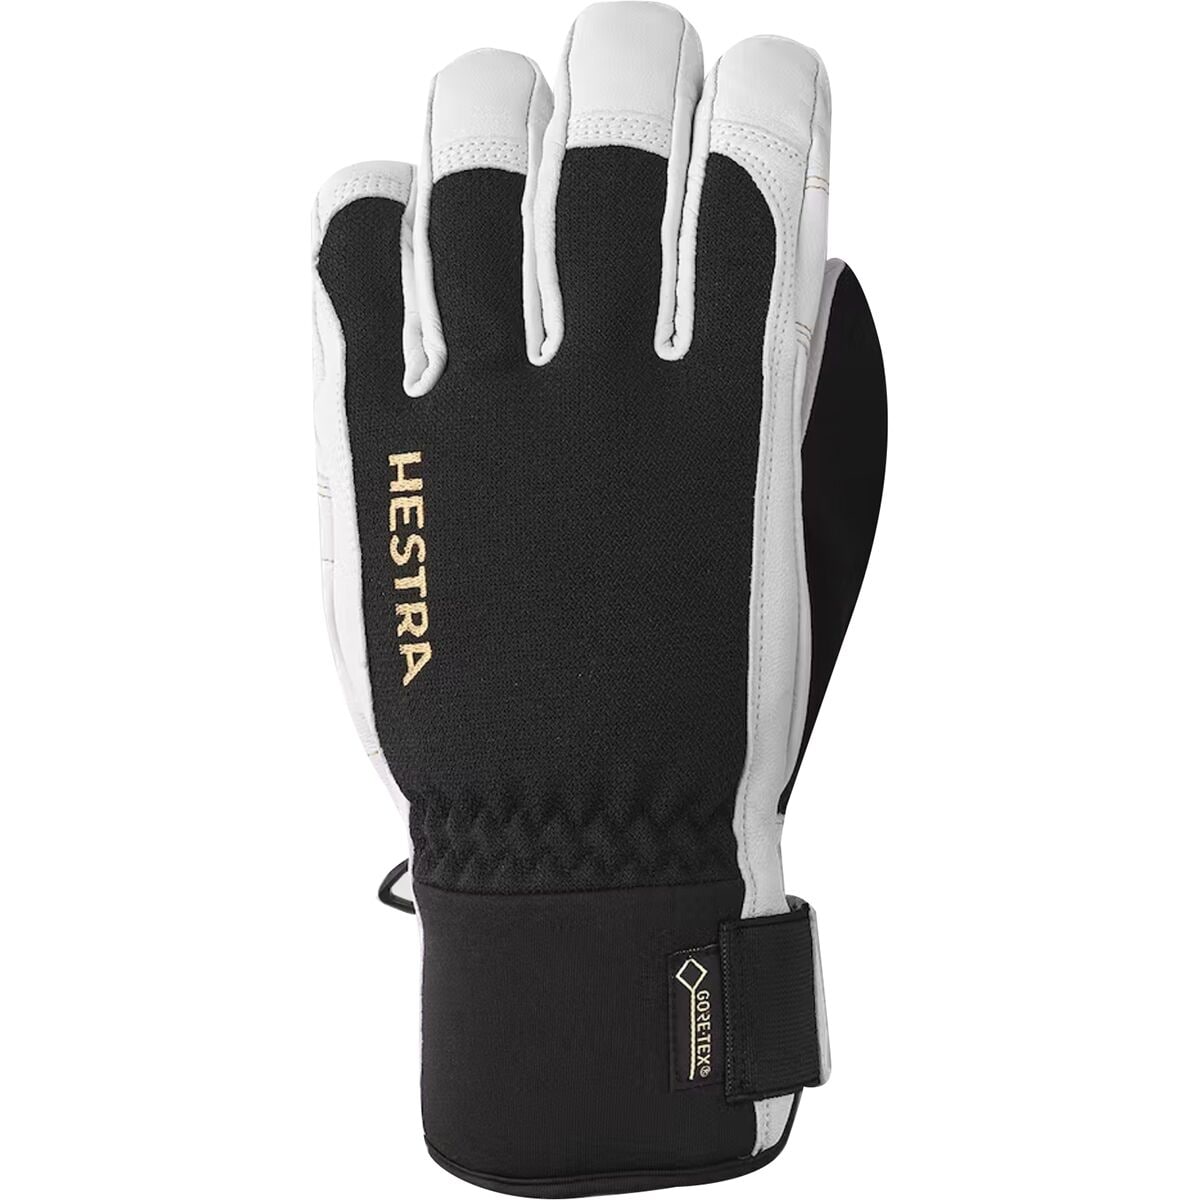 Hestra Army Leather GORE-TEX Short Glove - Men's